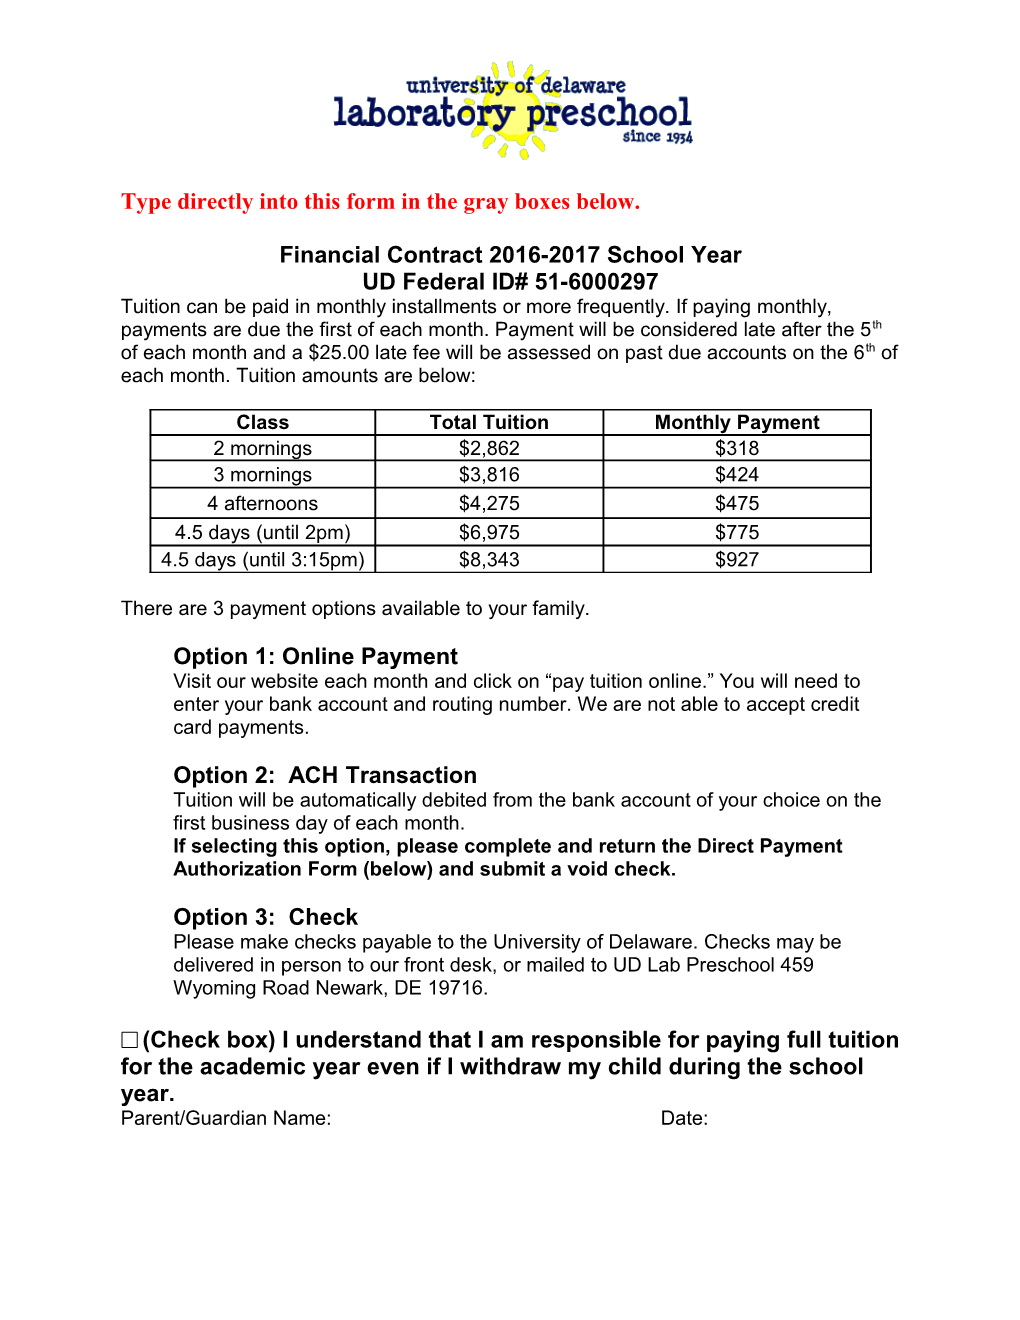 Payment Procedures for UD Laboratory Preschool Tuition